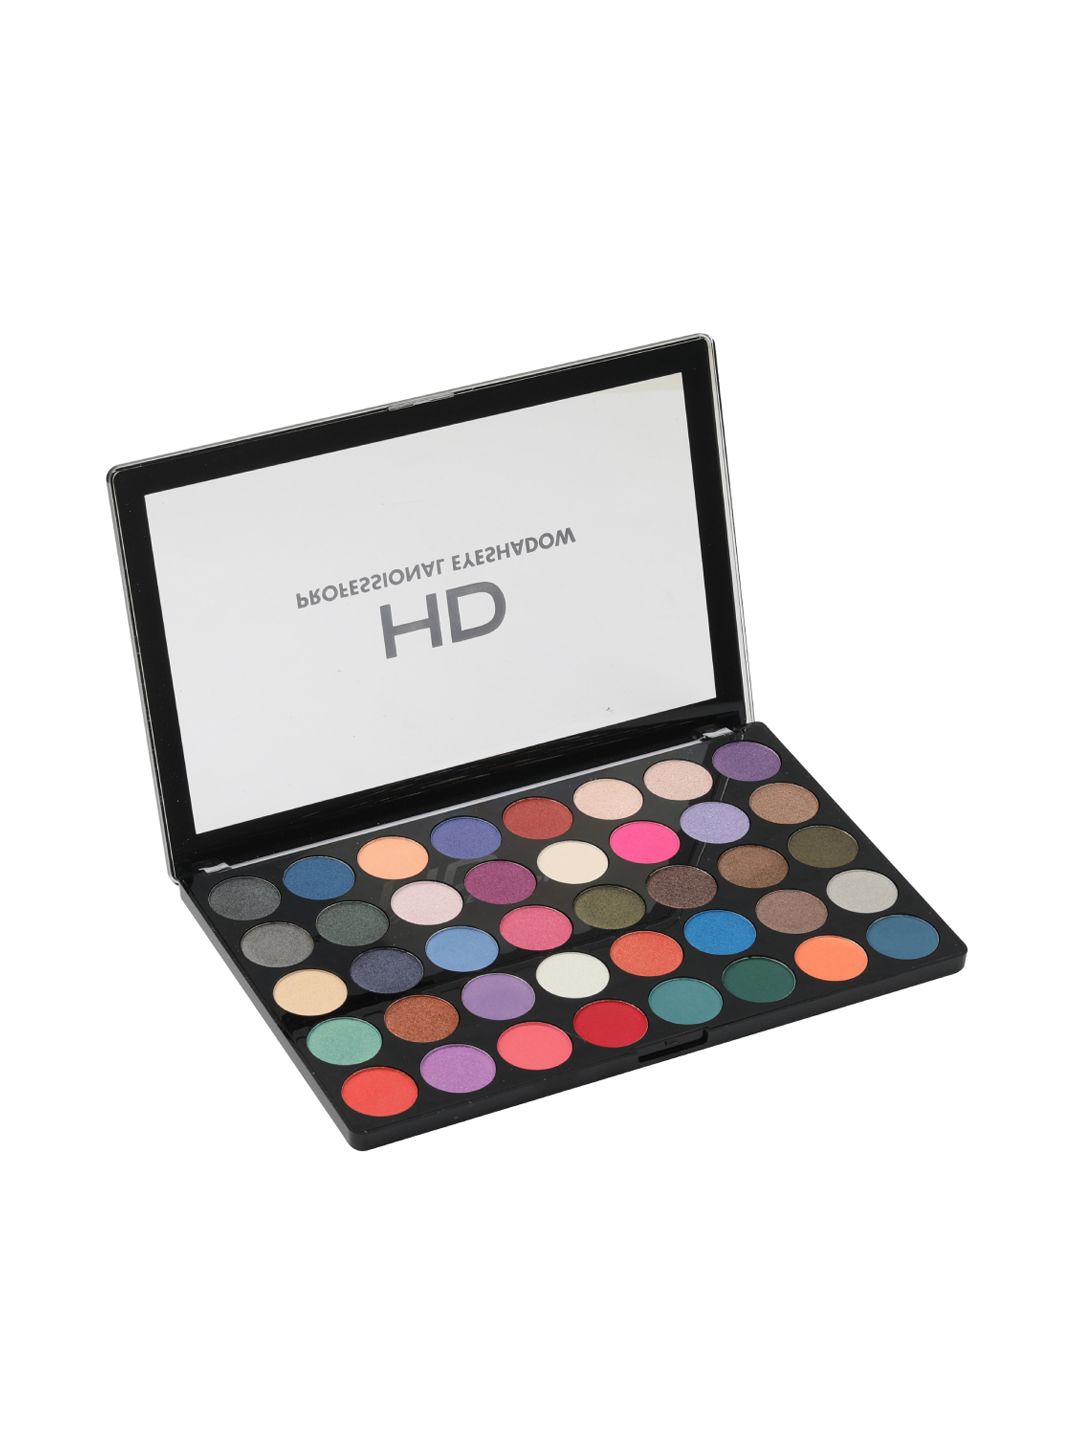 SWISS BEAUTY Professional HD Eyeshadow Palette - 03 Price in India